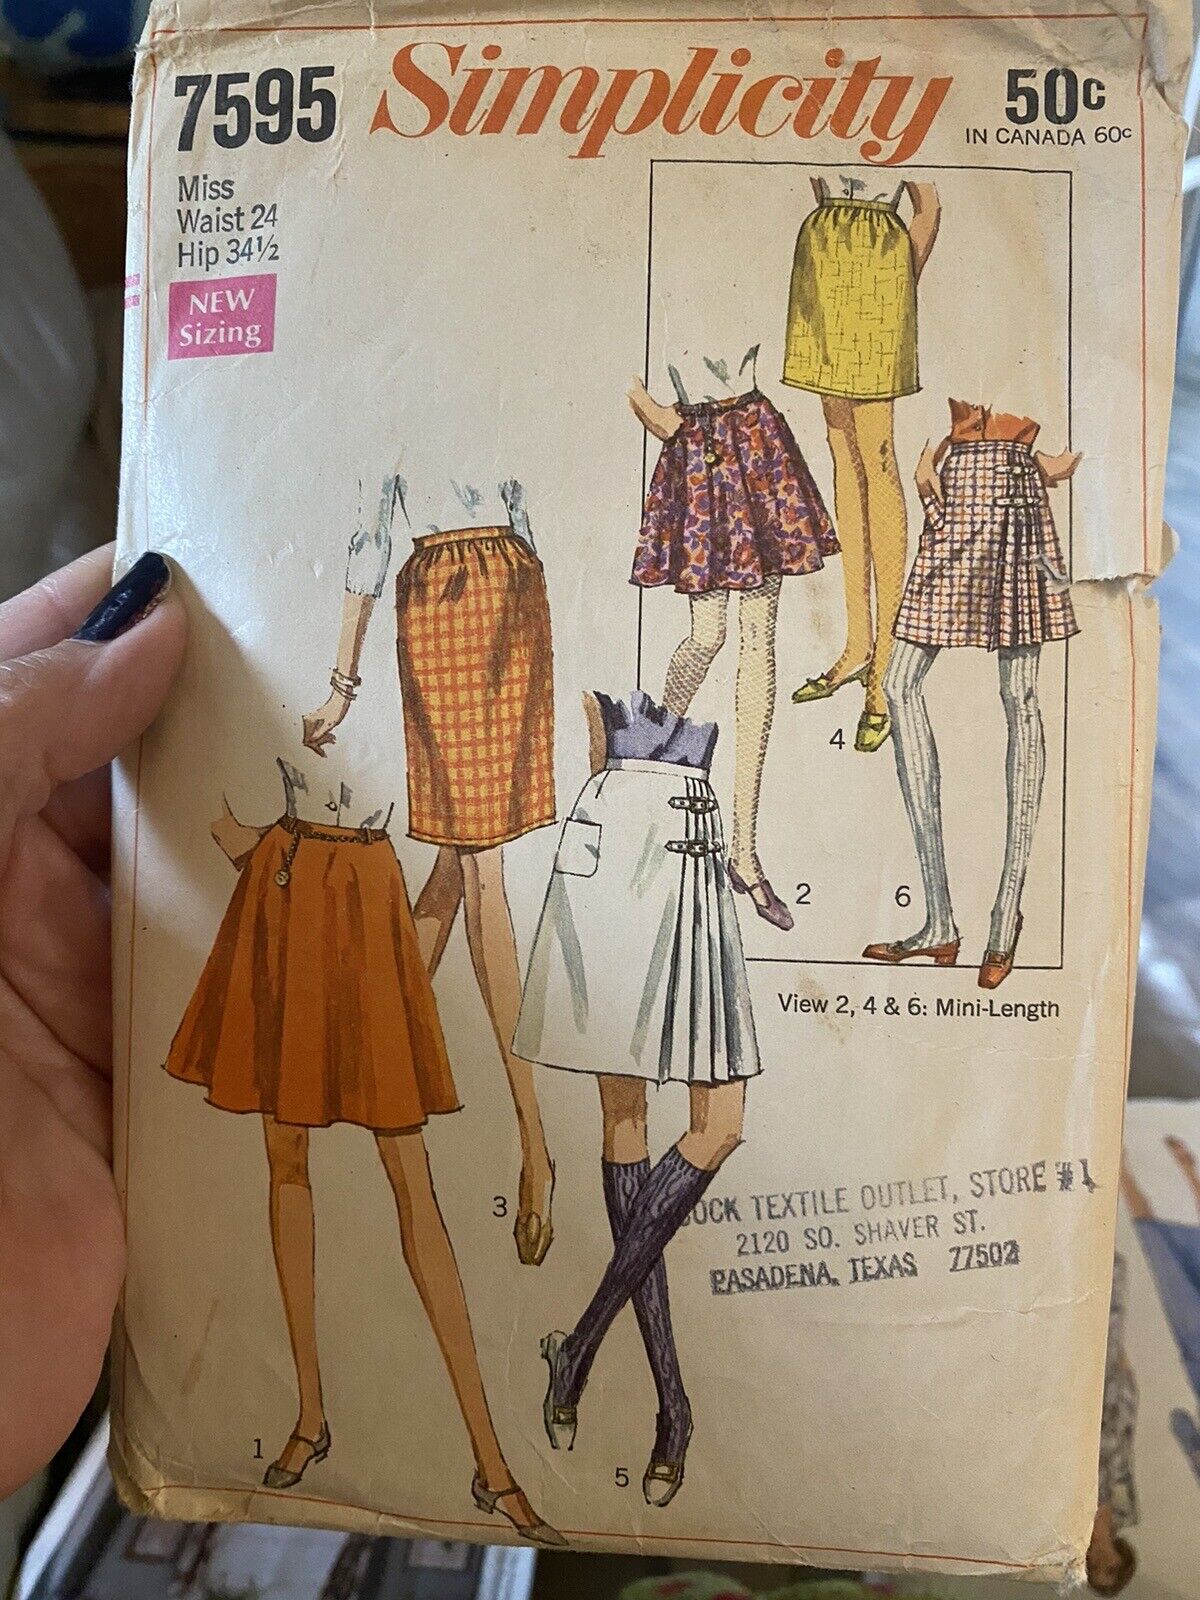 Vintage 1968 Simplicity Sewing Pattern 7595 Size Waist 24 Cut And Complete